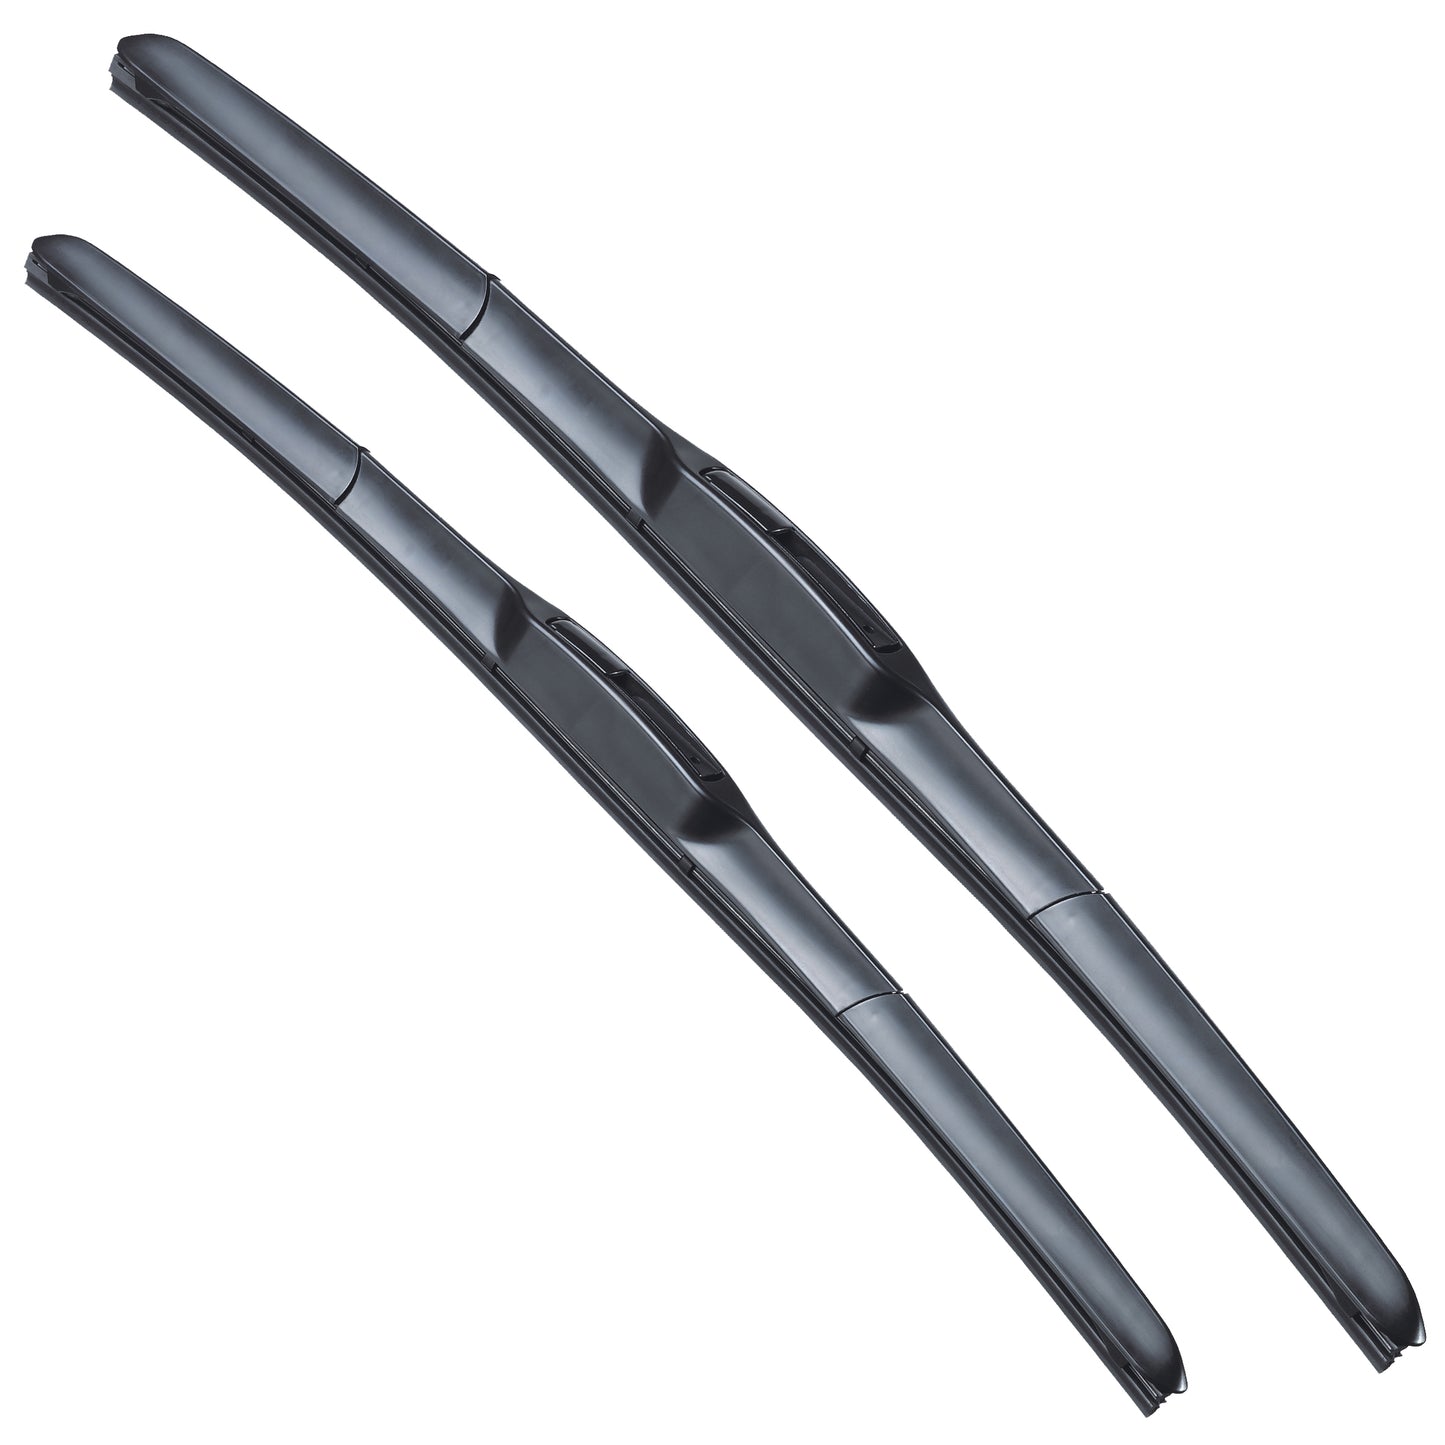 NISSAN 370 Z Coupe Jun 2009 to Oct 2021 Wiper Blade Kit